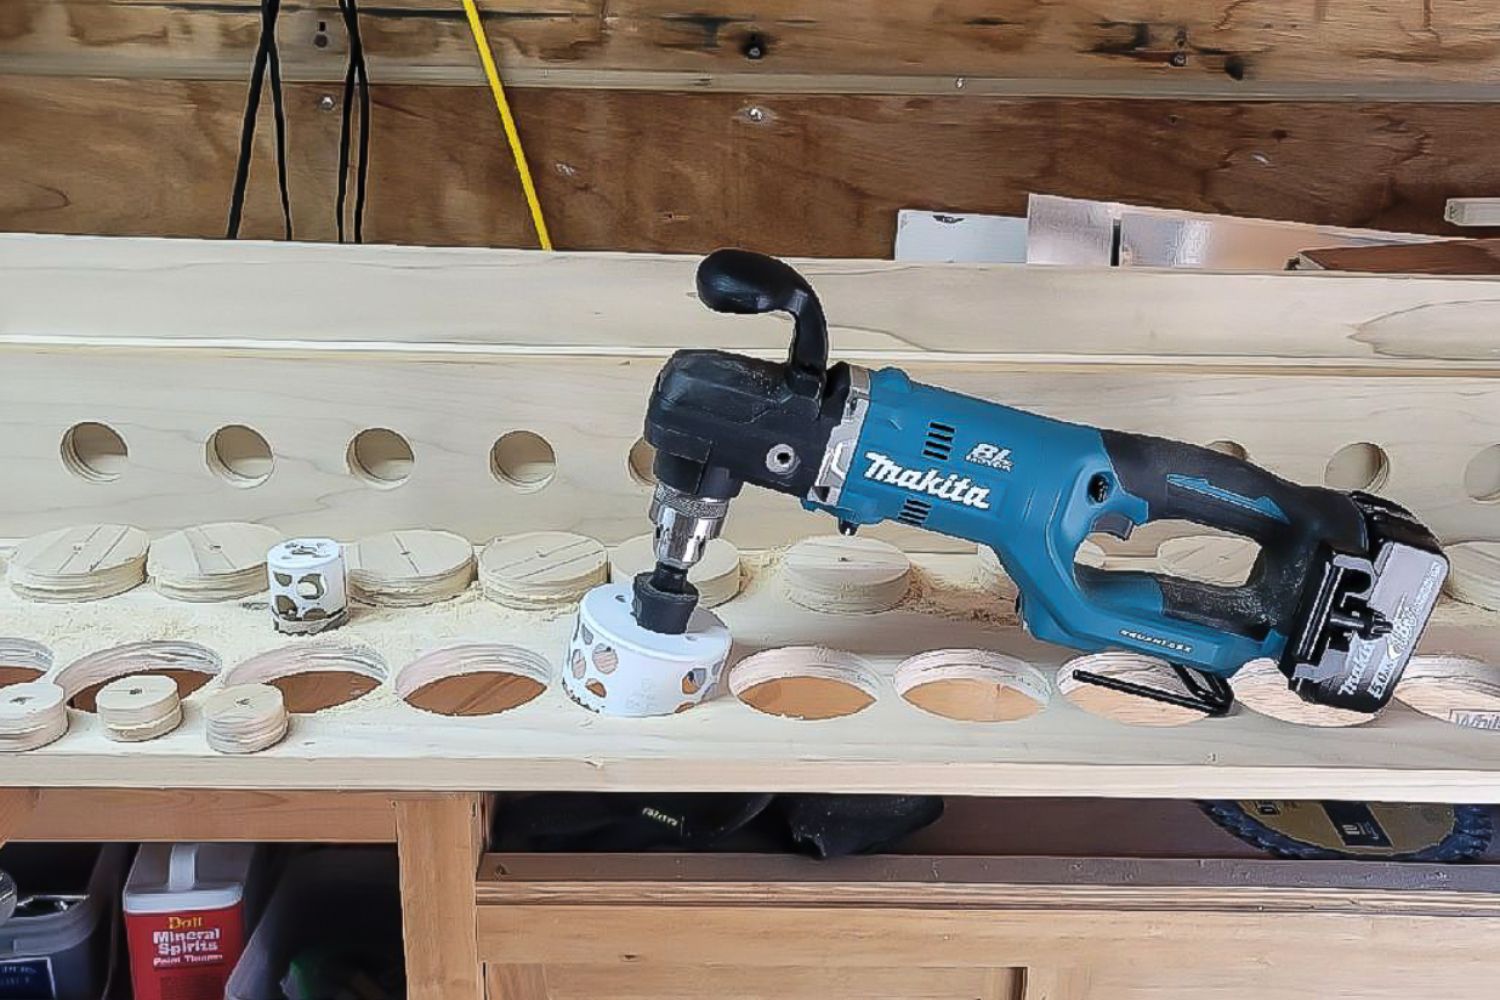 The Makita right-angle drill sitting on a workbench